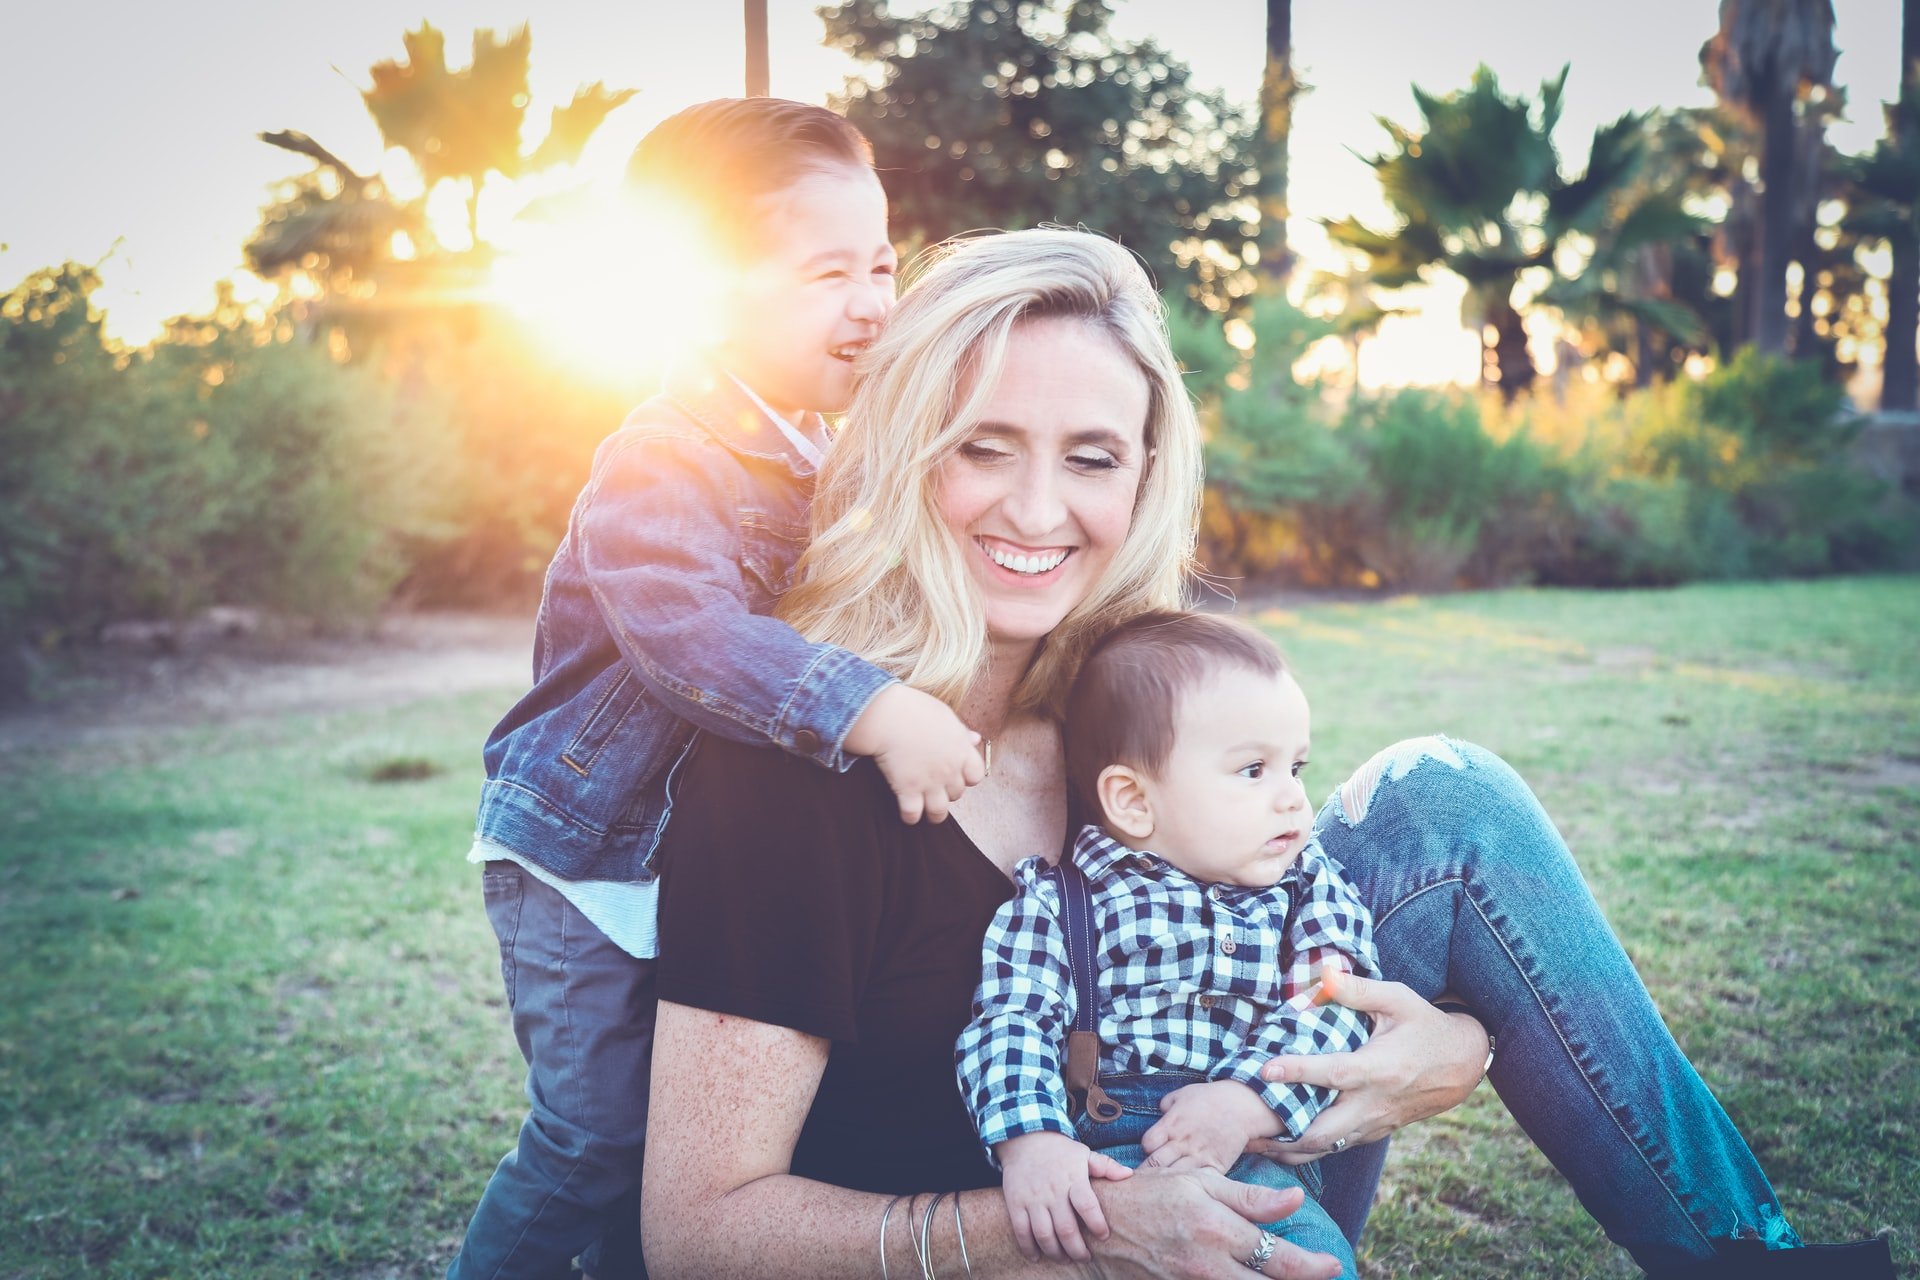 OP believed she was an easy-going mother | Source: Unsplash